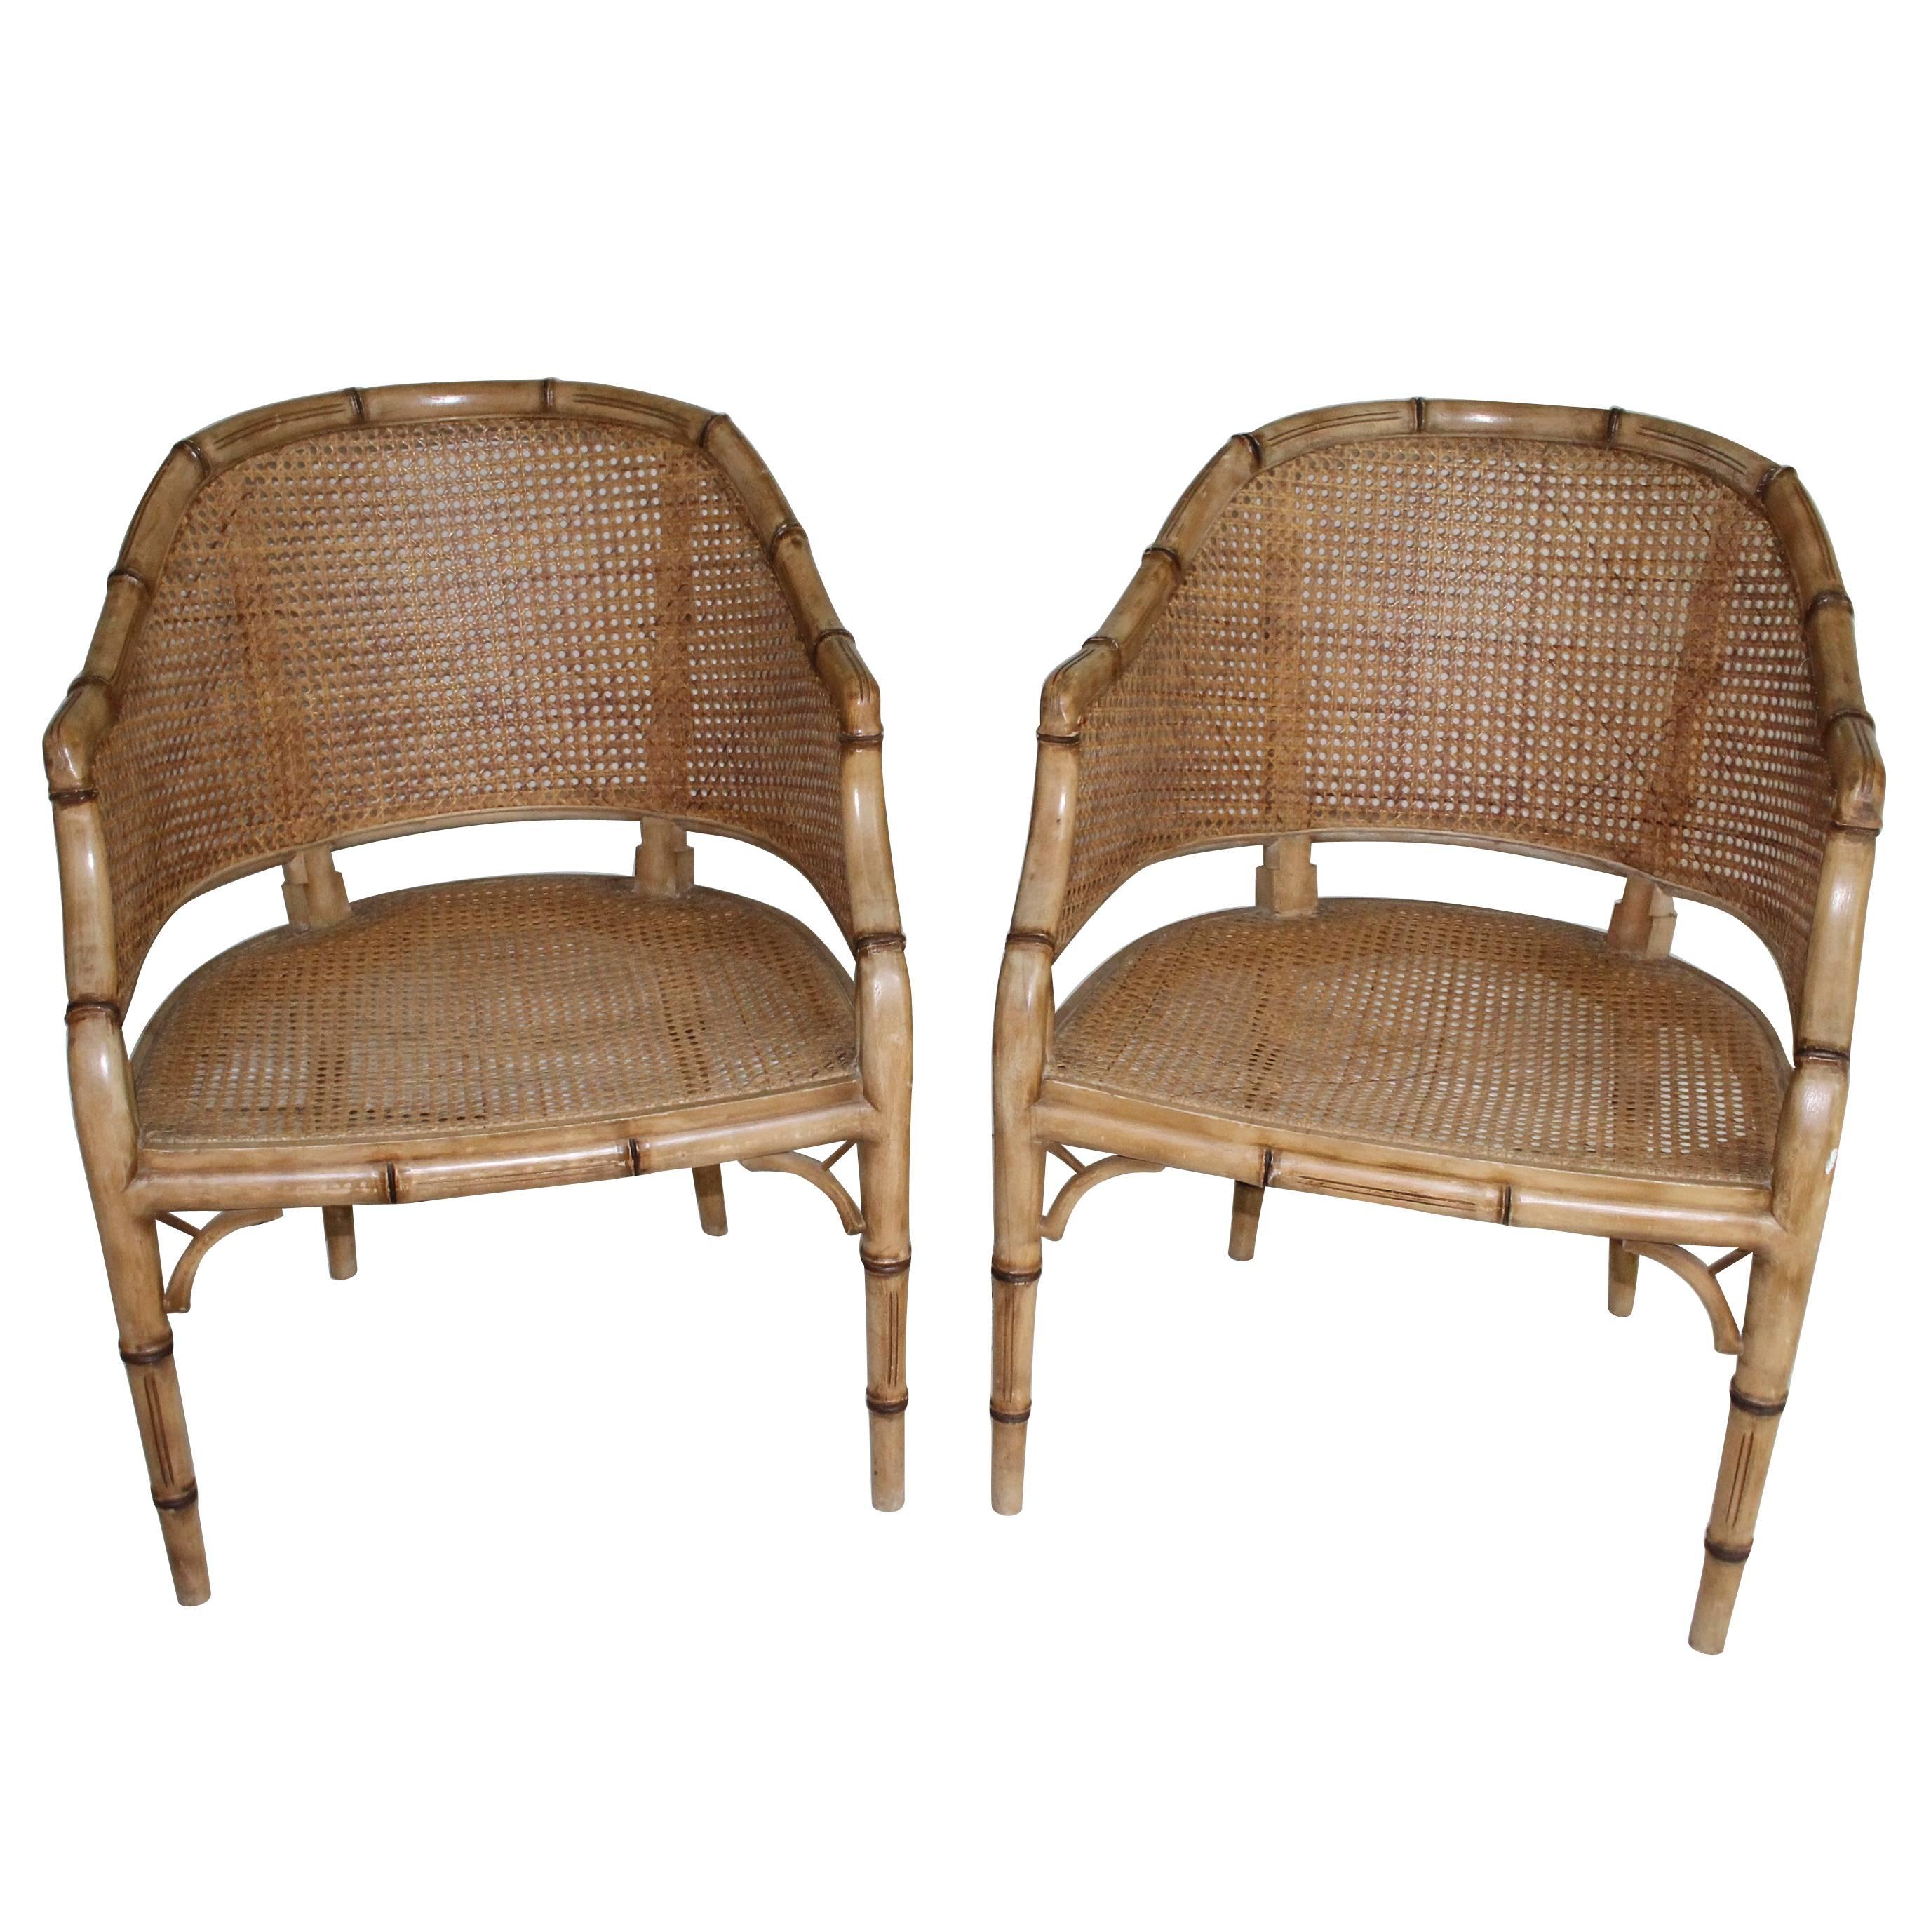 Pair of Vintage French Faux Bamboo Wood Chairs